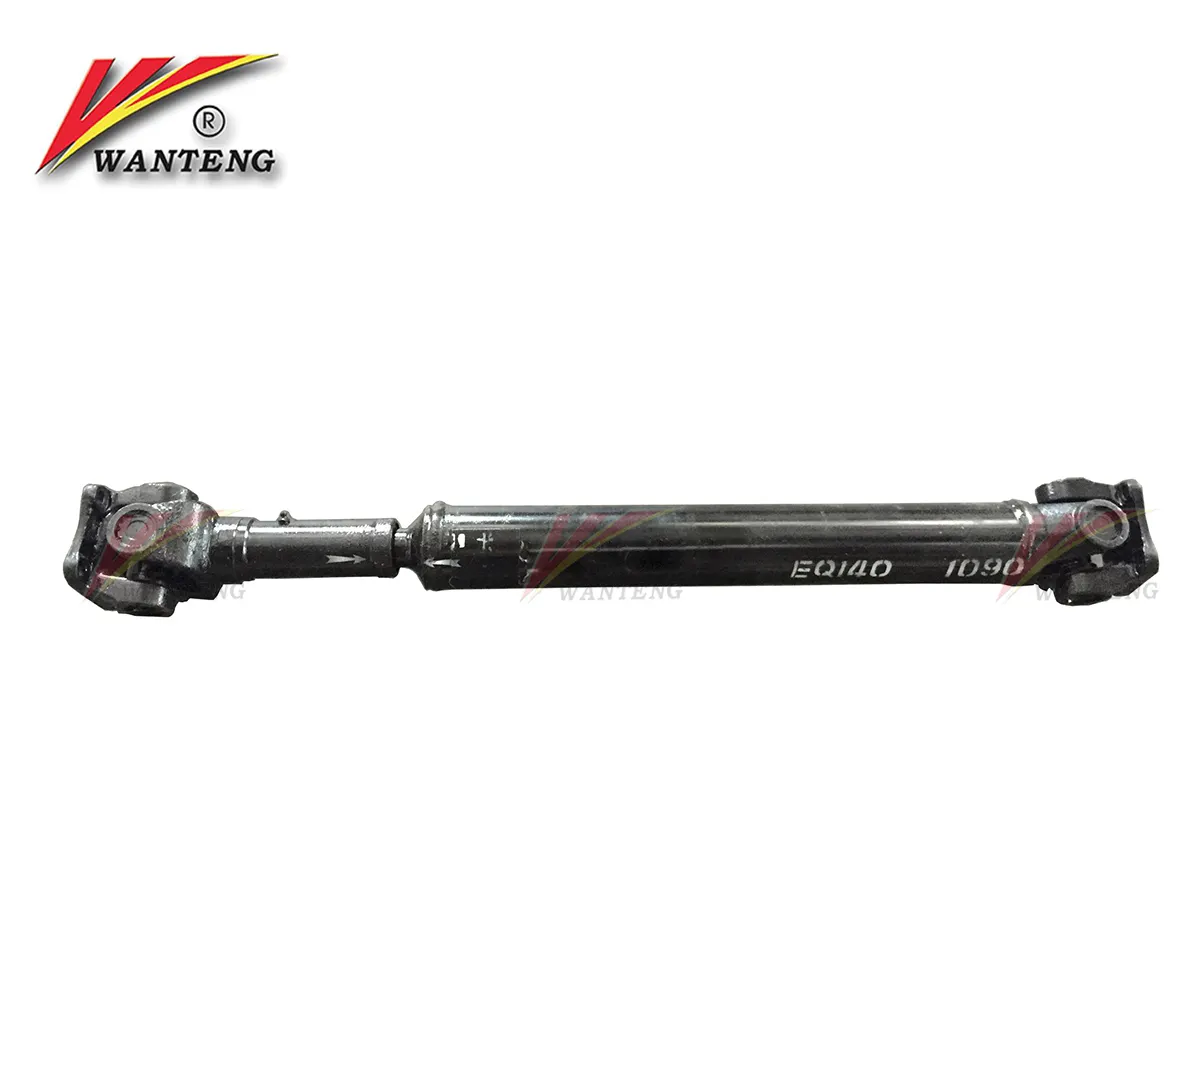 Semi Trailer Truck Customized Transmission Assembly Parts Chinese Factory Drive Shaft Propeller Shafts